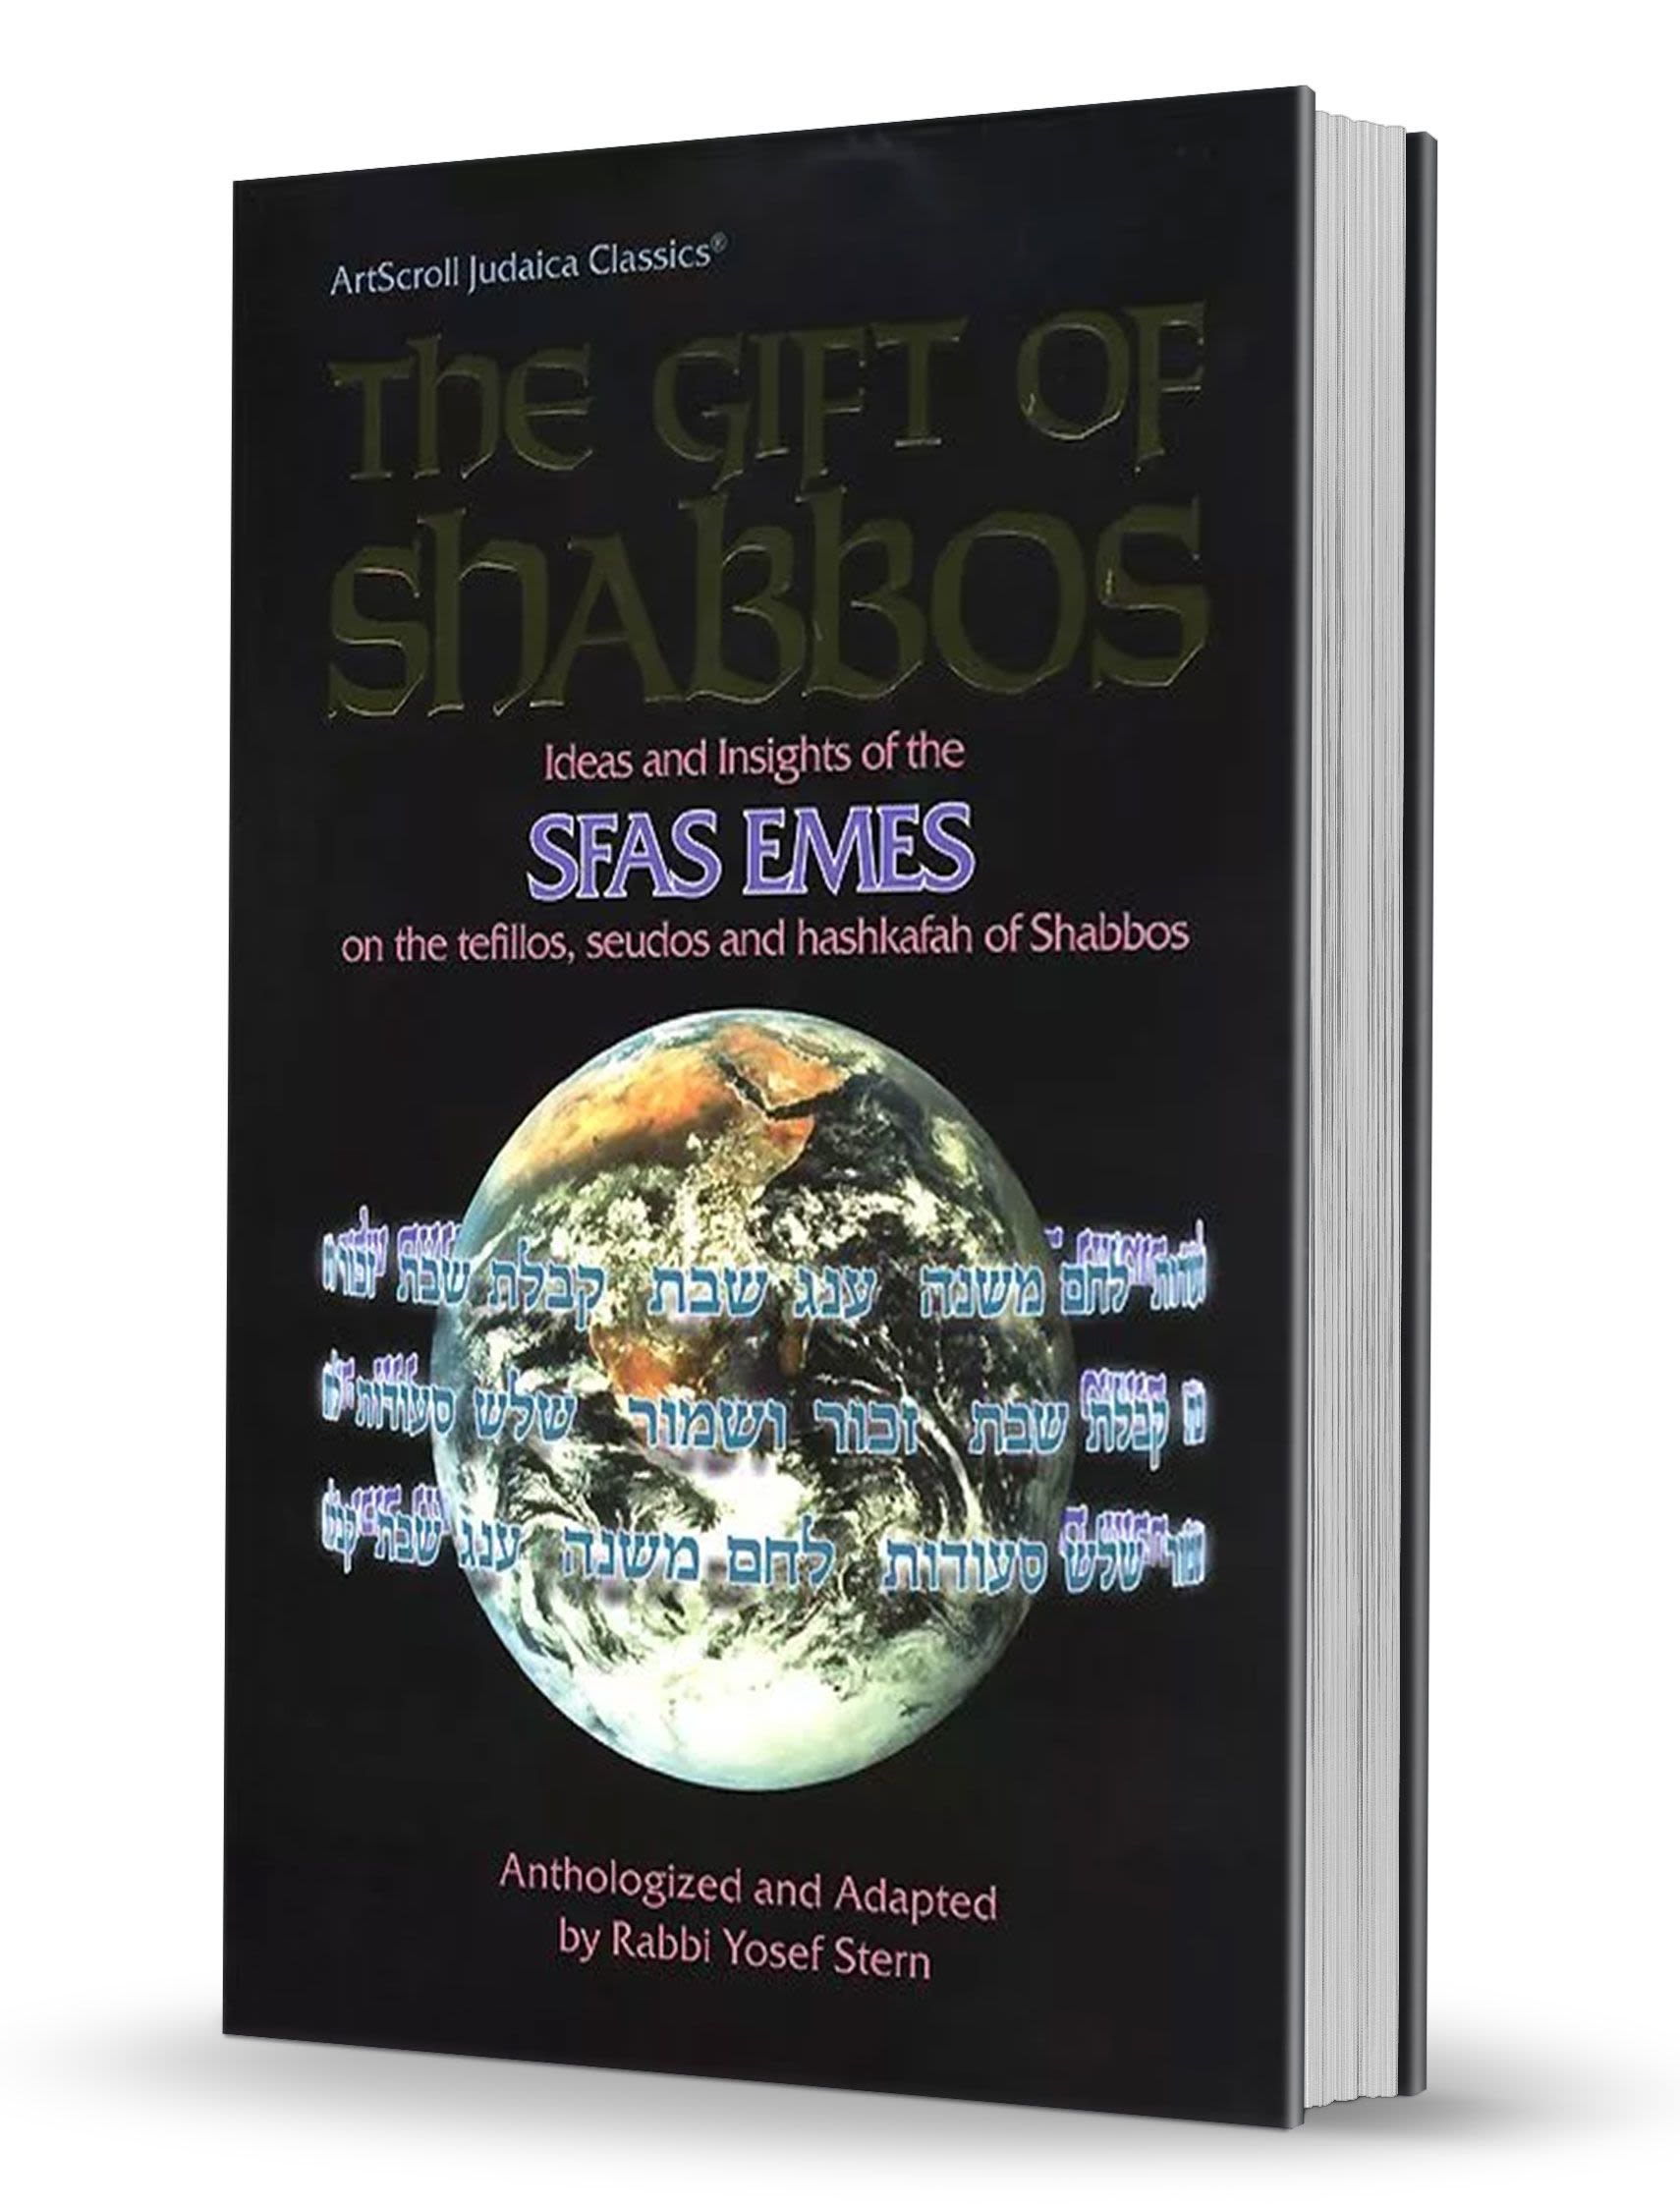 The Gift of Shabbos: Sfas Emes on Shabbos